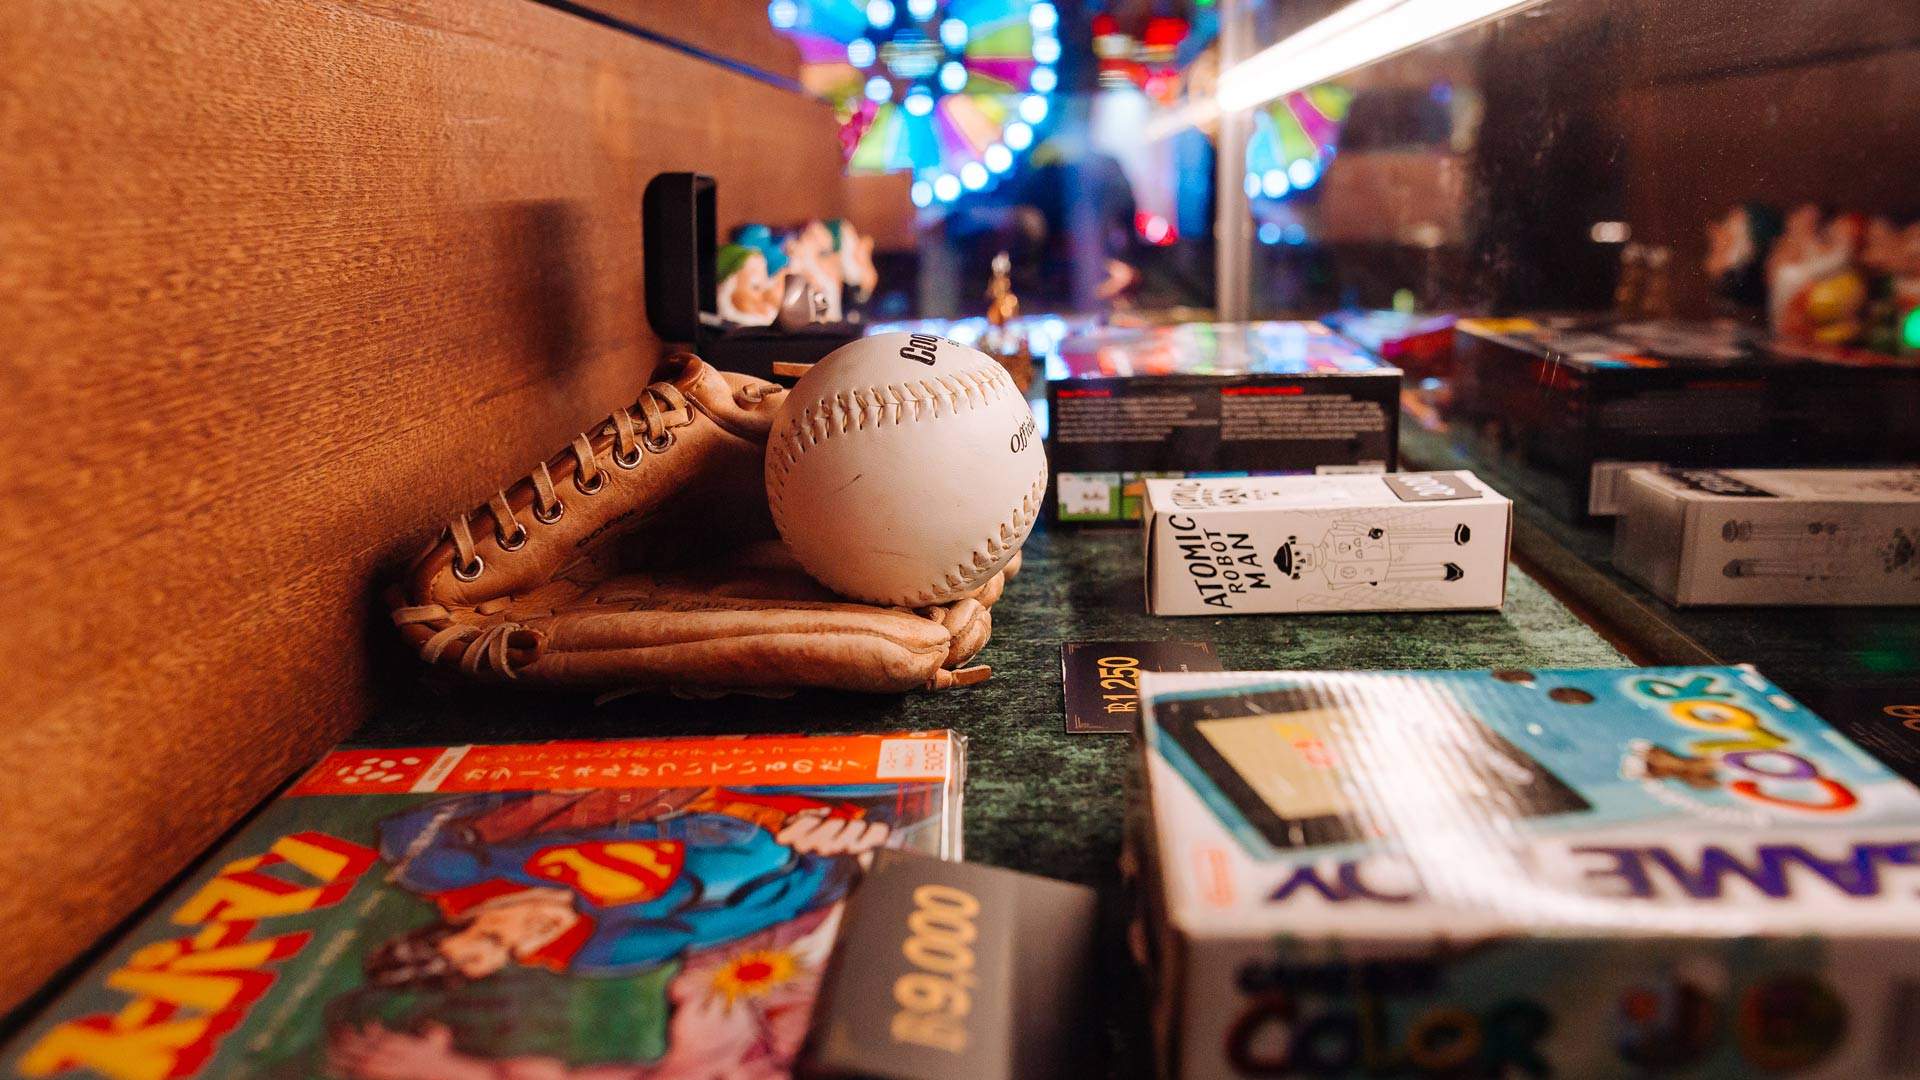 A New Adults-Only Arcade Bar from the Holey Moley Team Has Just Opened In Fortitude Valley